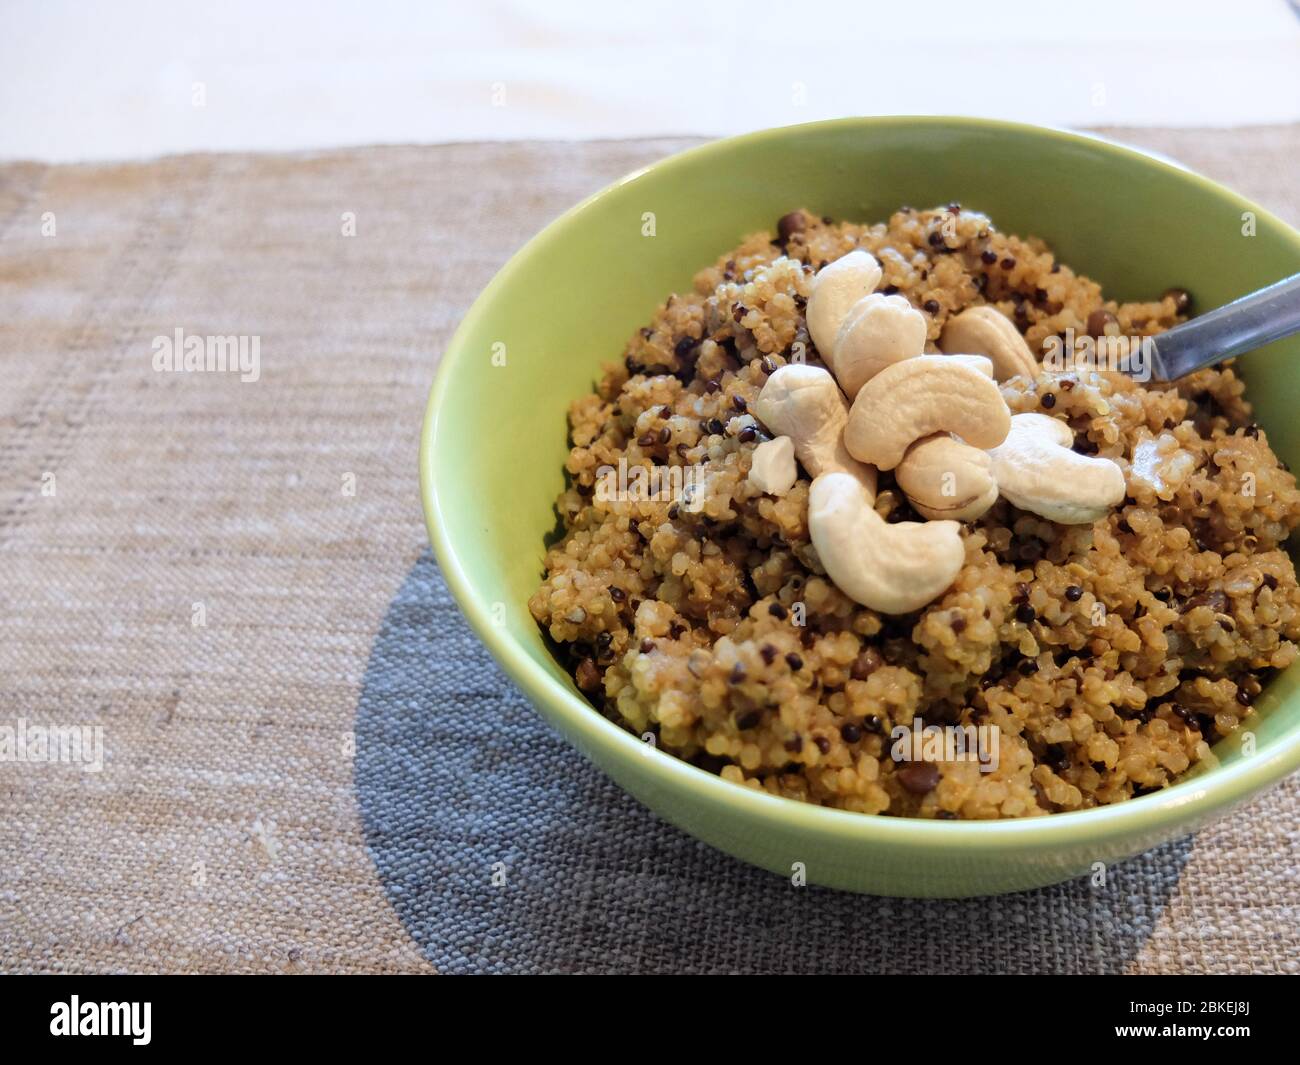 Vegetarian quinoa dish served in a bowl Stock Photo